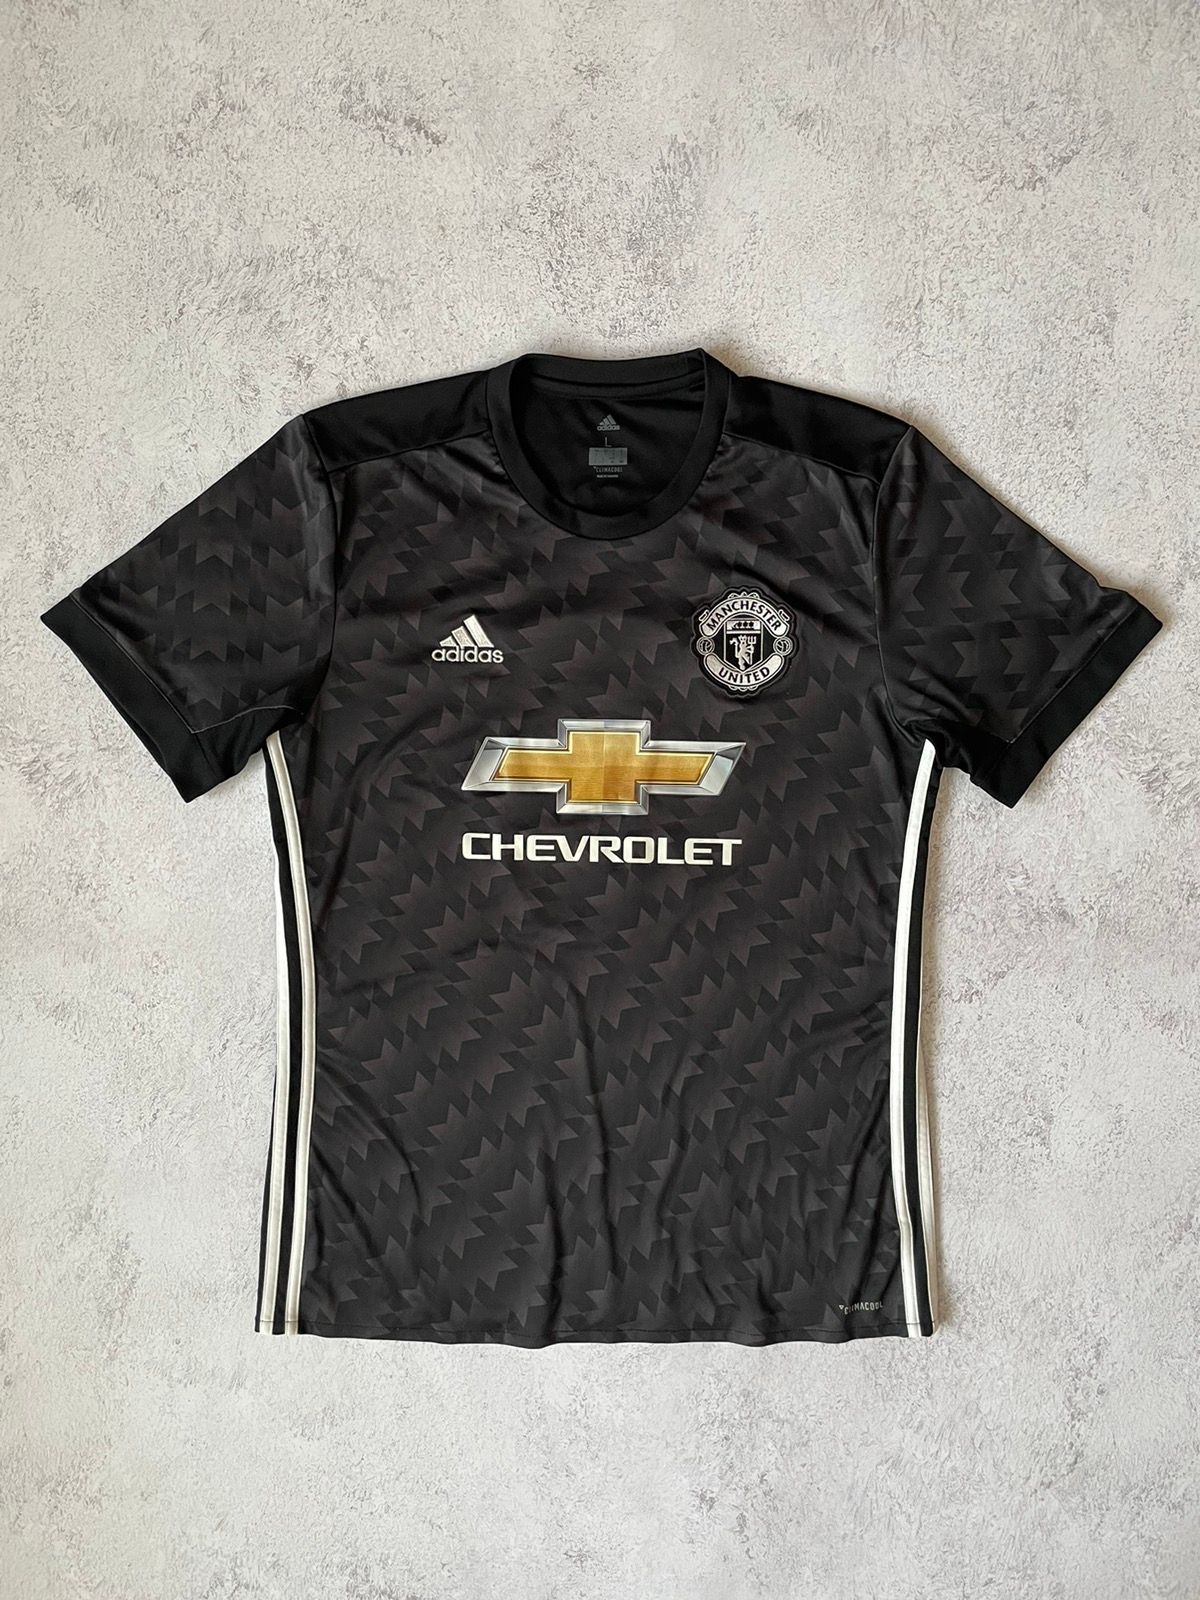 Pre-owned Nike Adidas Manchester United 2017-2018 Jersey 3 Eric Bailly In Multicolor